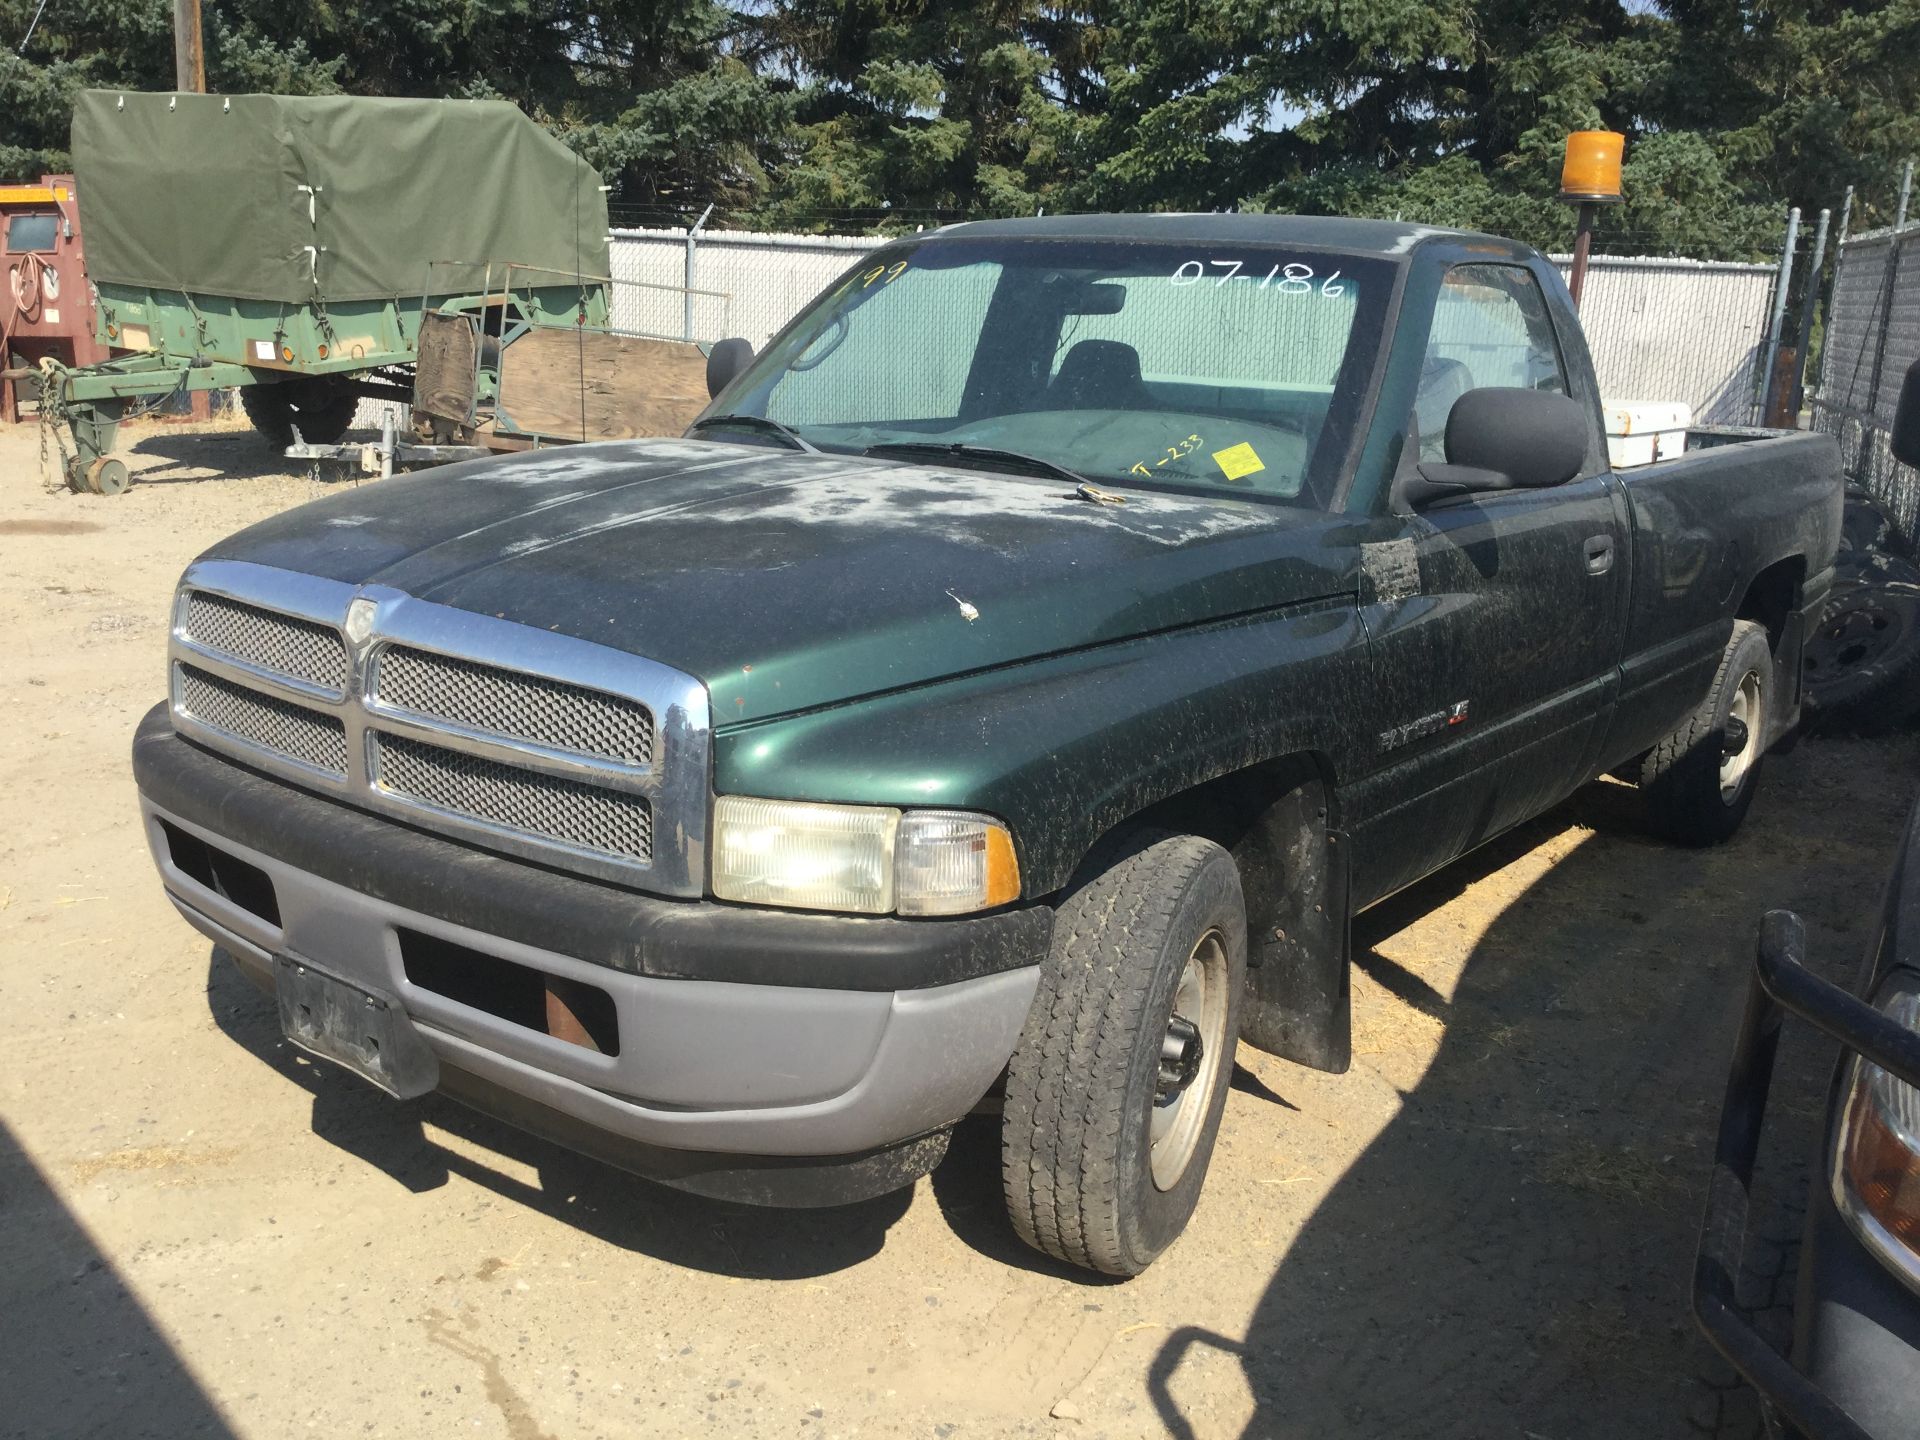 Year: 2000 Make: Dodge Model: 1/2T Type: Pickup Vin#: 561821 Mileage/Hours: 176001 3.9L, 2WD, RC,